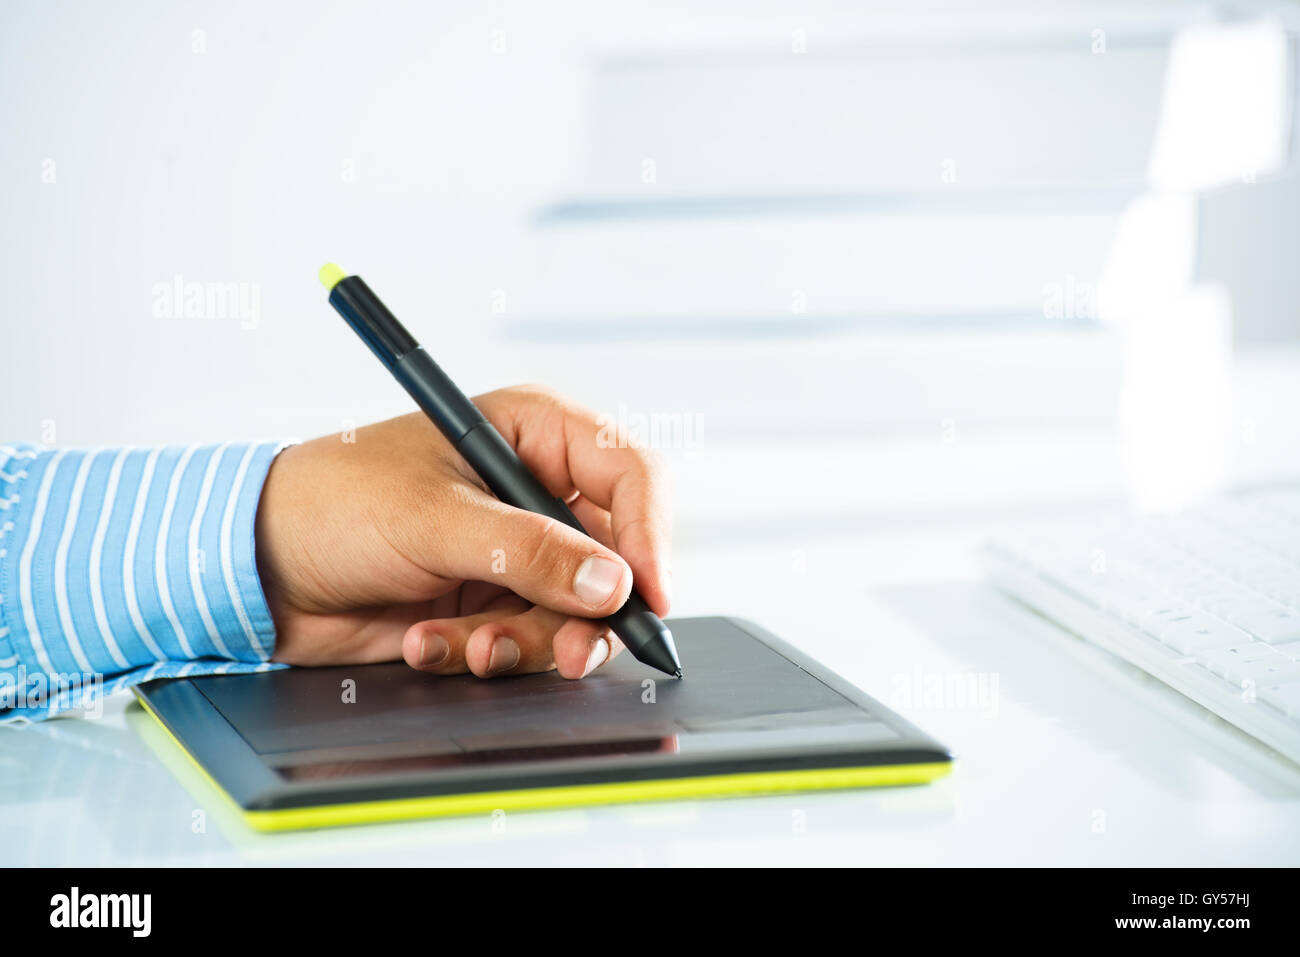 close-up of a man's hand with a pen stylus Stock Photo